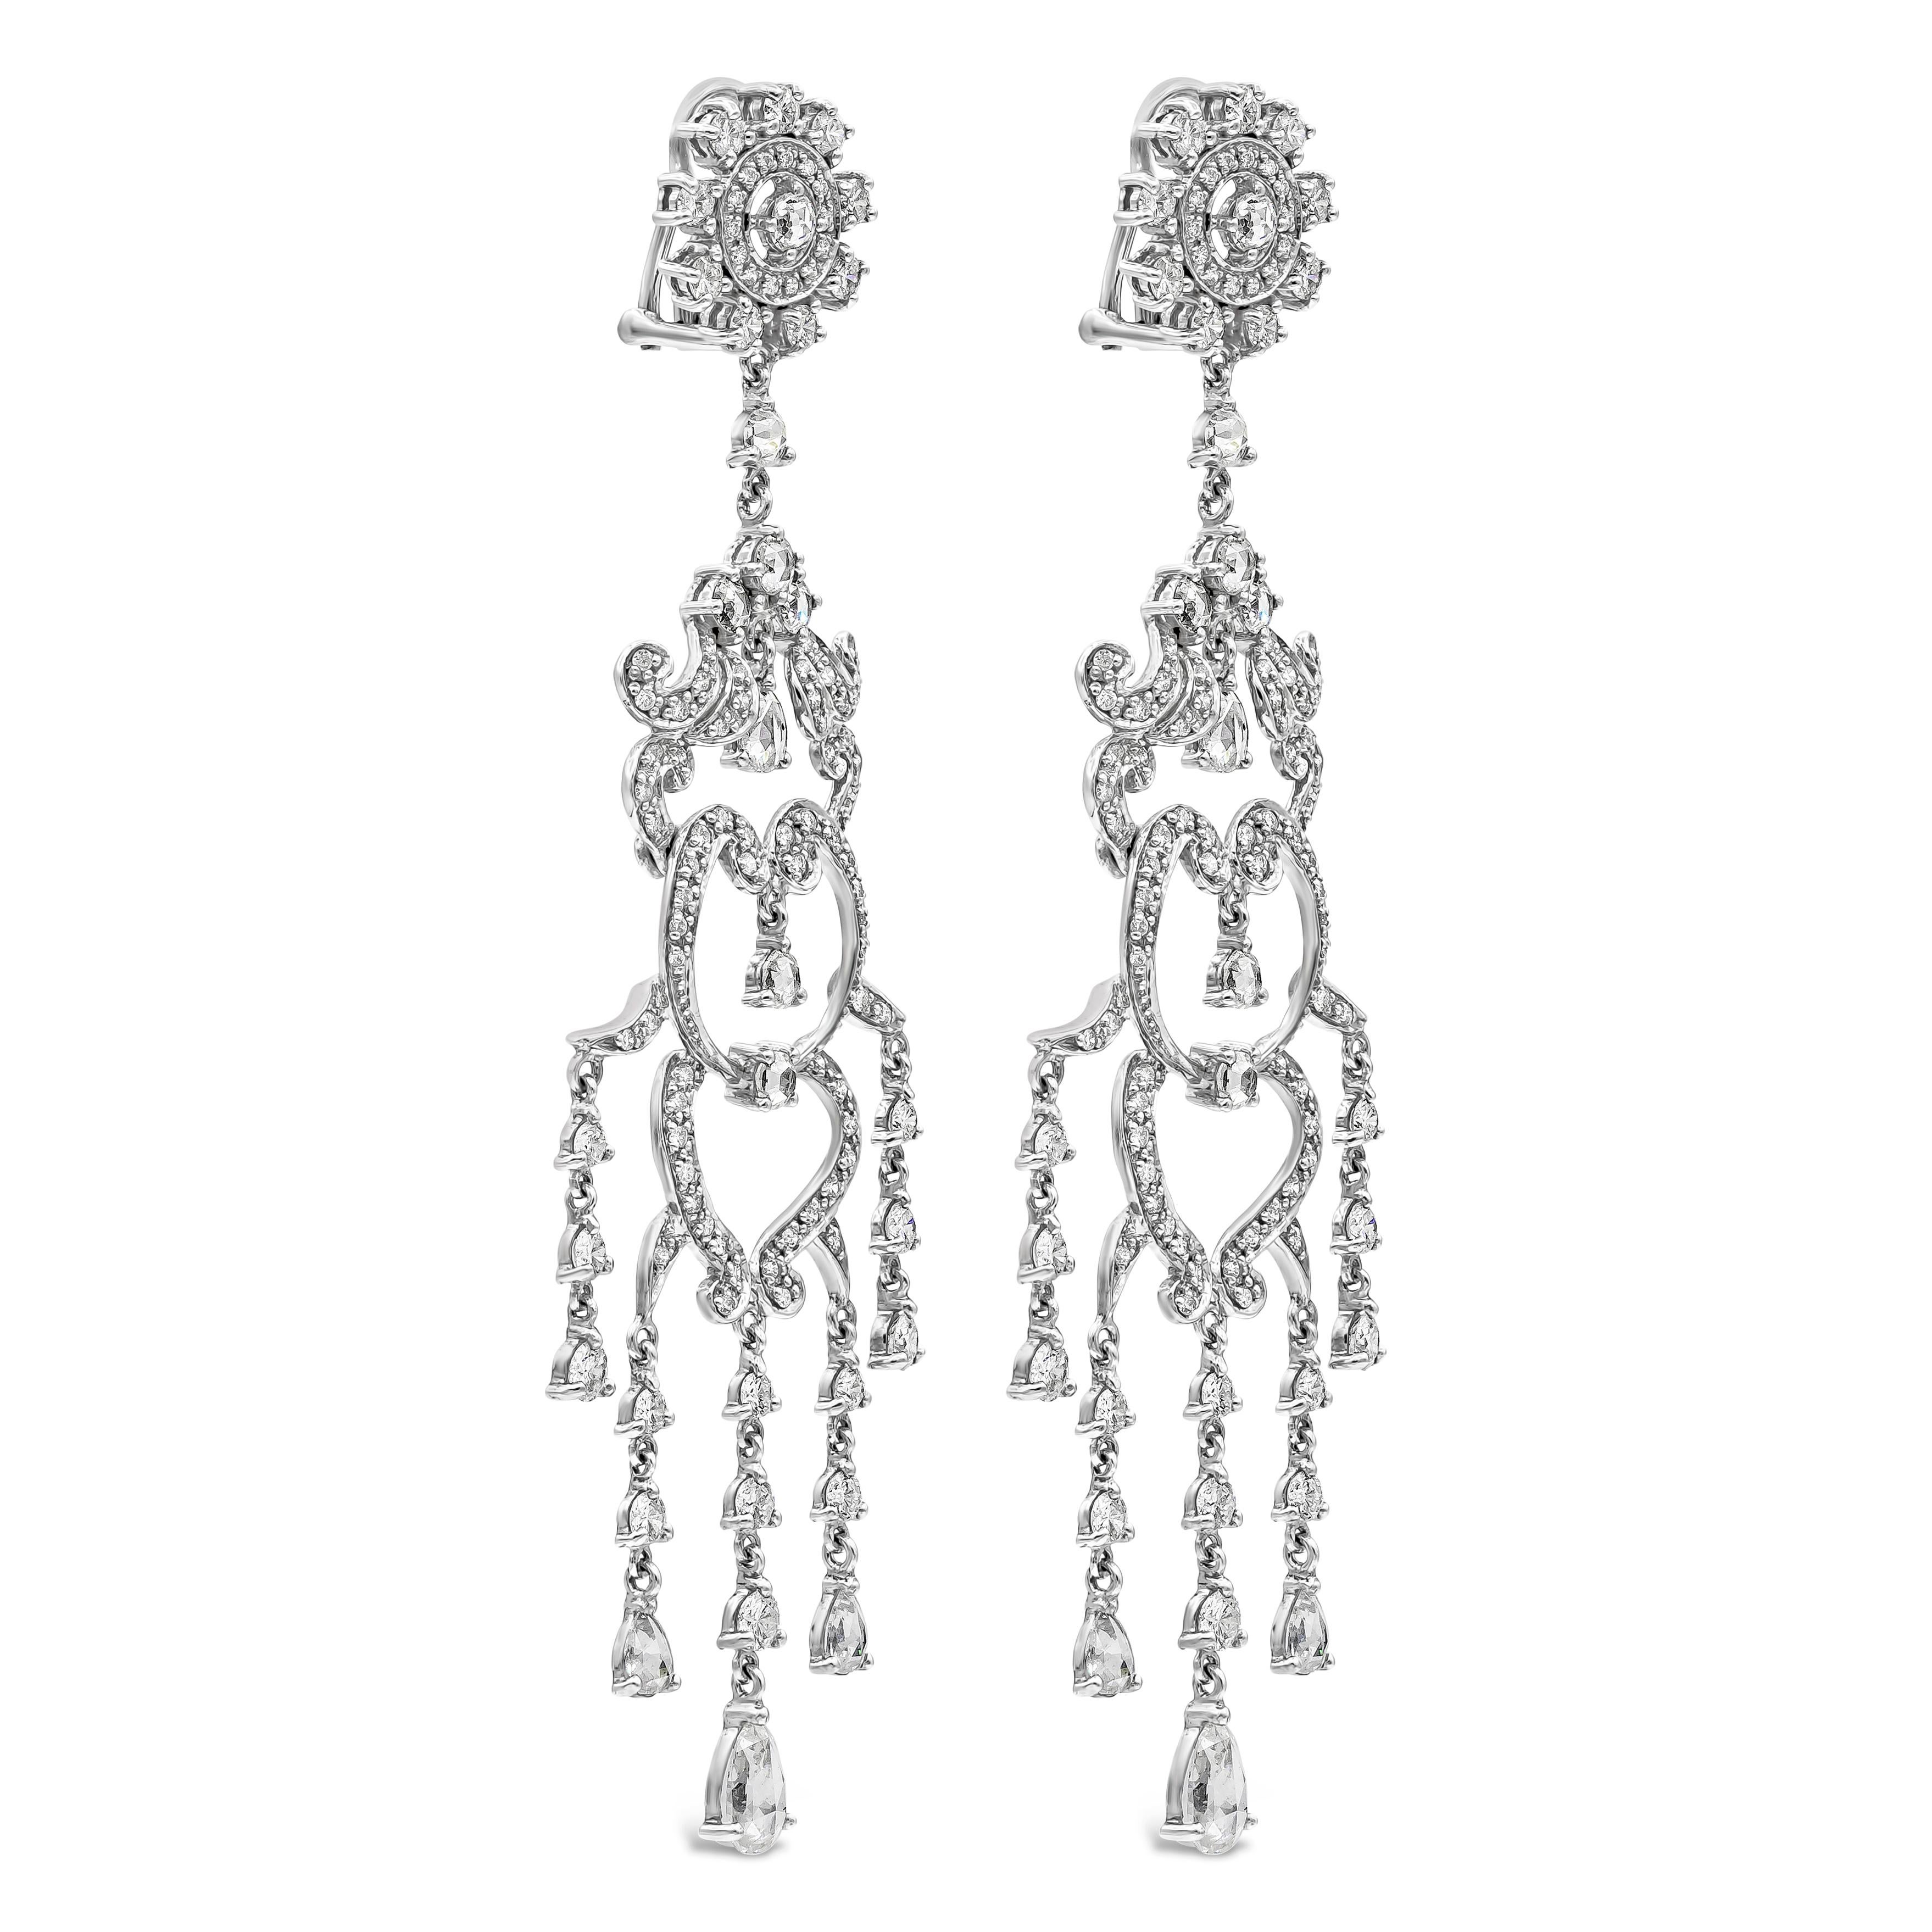 Features a combination of brilliant and rose cut diamonds, set in an intricate and delicate open-work chandelier design. Diamonds weigh 6.82 carats total. Made in 18k white gold. 3.5 inches in length.

Style available in different price ranges.